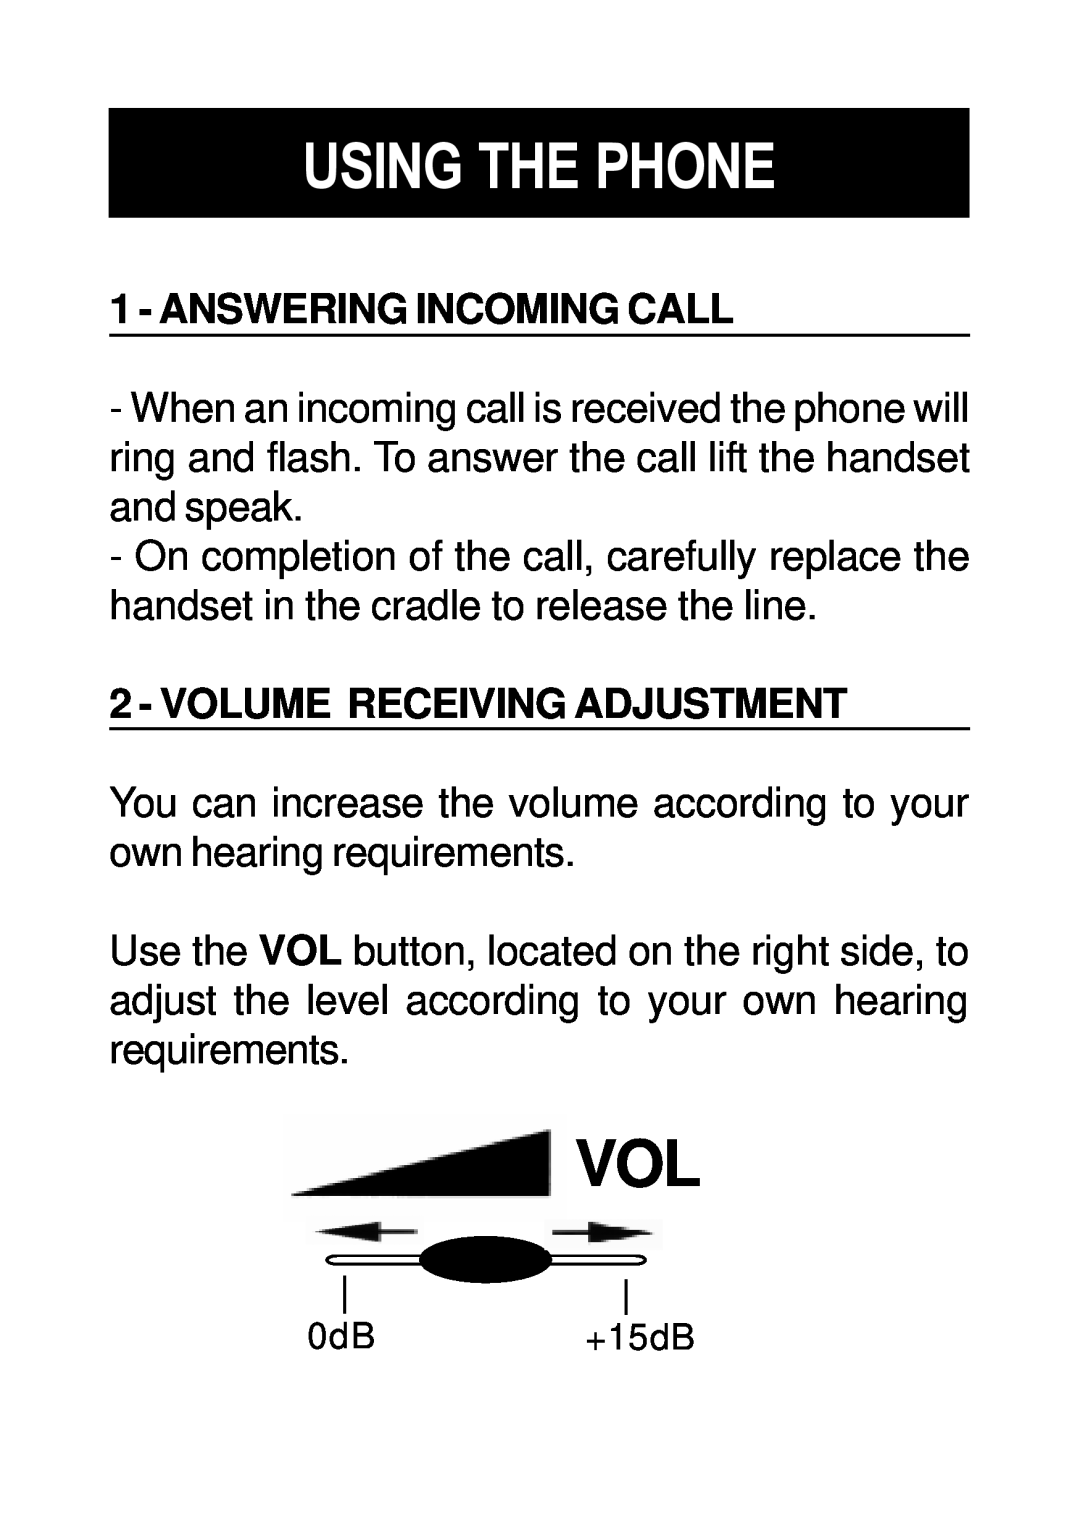 Geemarc Dallas 10 manual Using The Phone, Answering Incoming Call, Volume Receiving Adjustment 